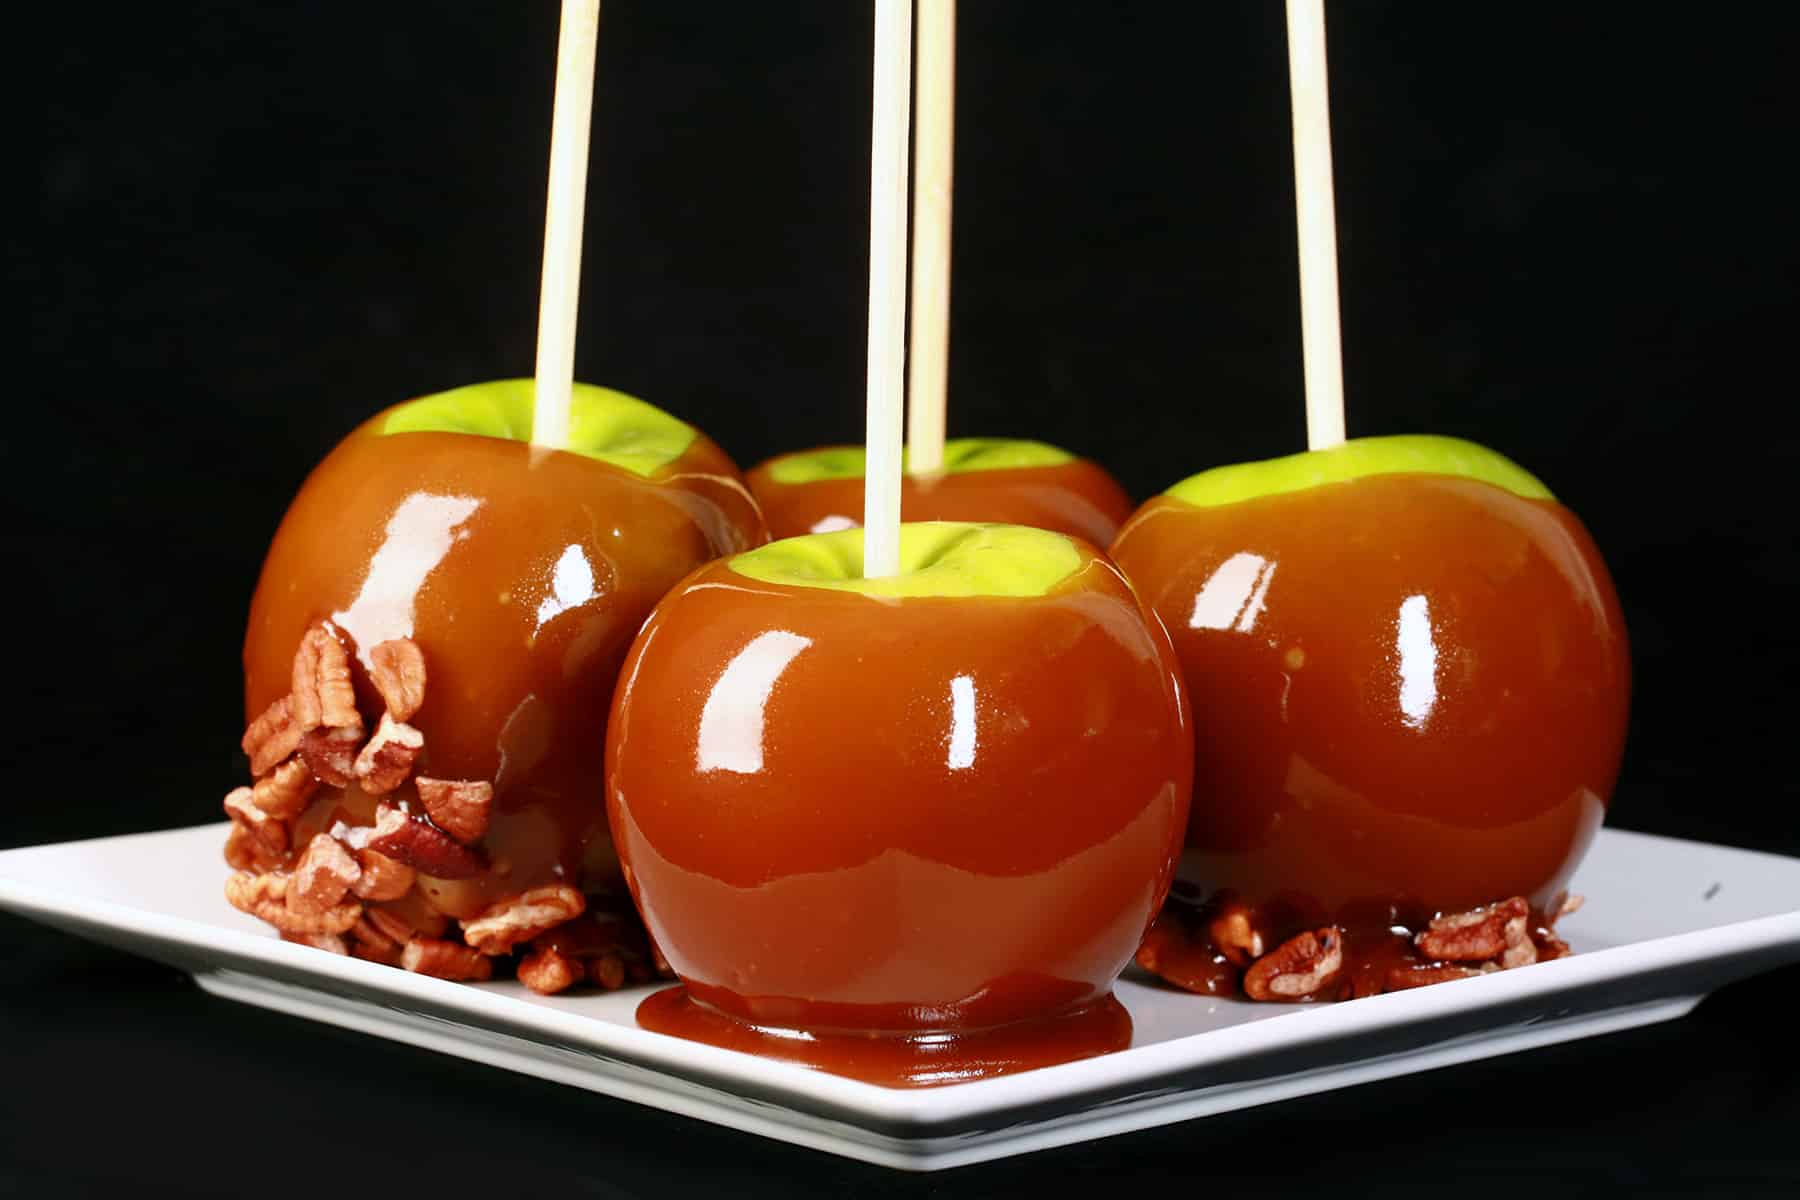 A plate of 4 maple caramel apples, 2 of which are dipped in chopped pecans.